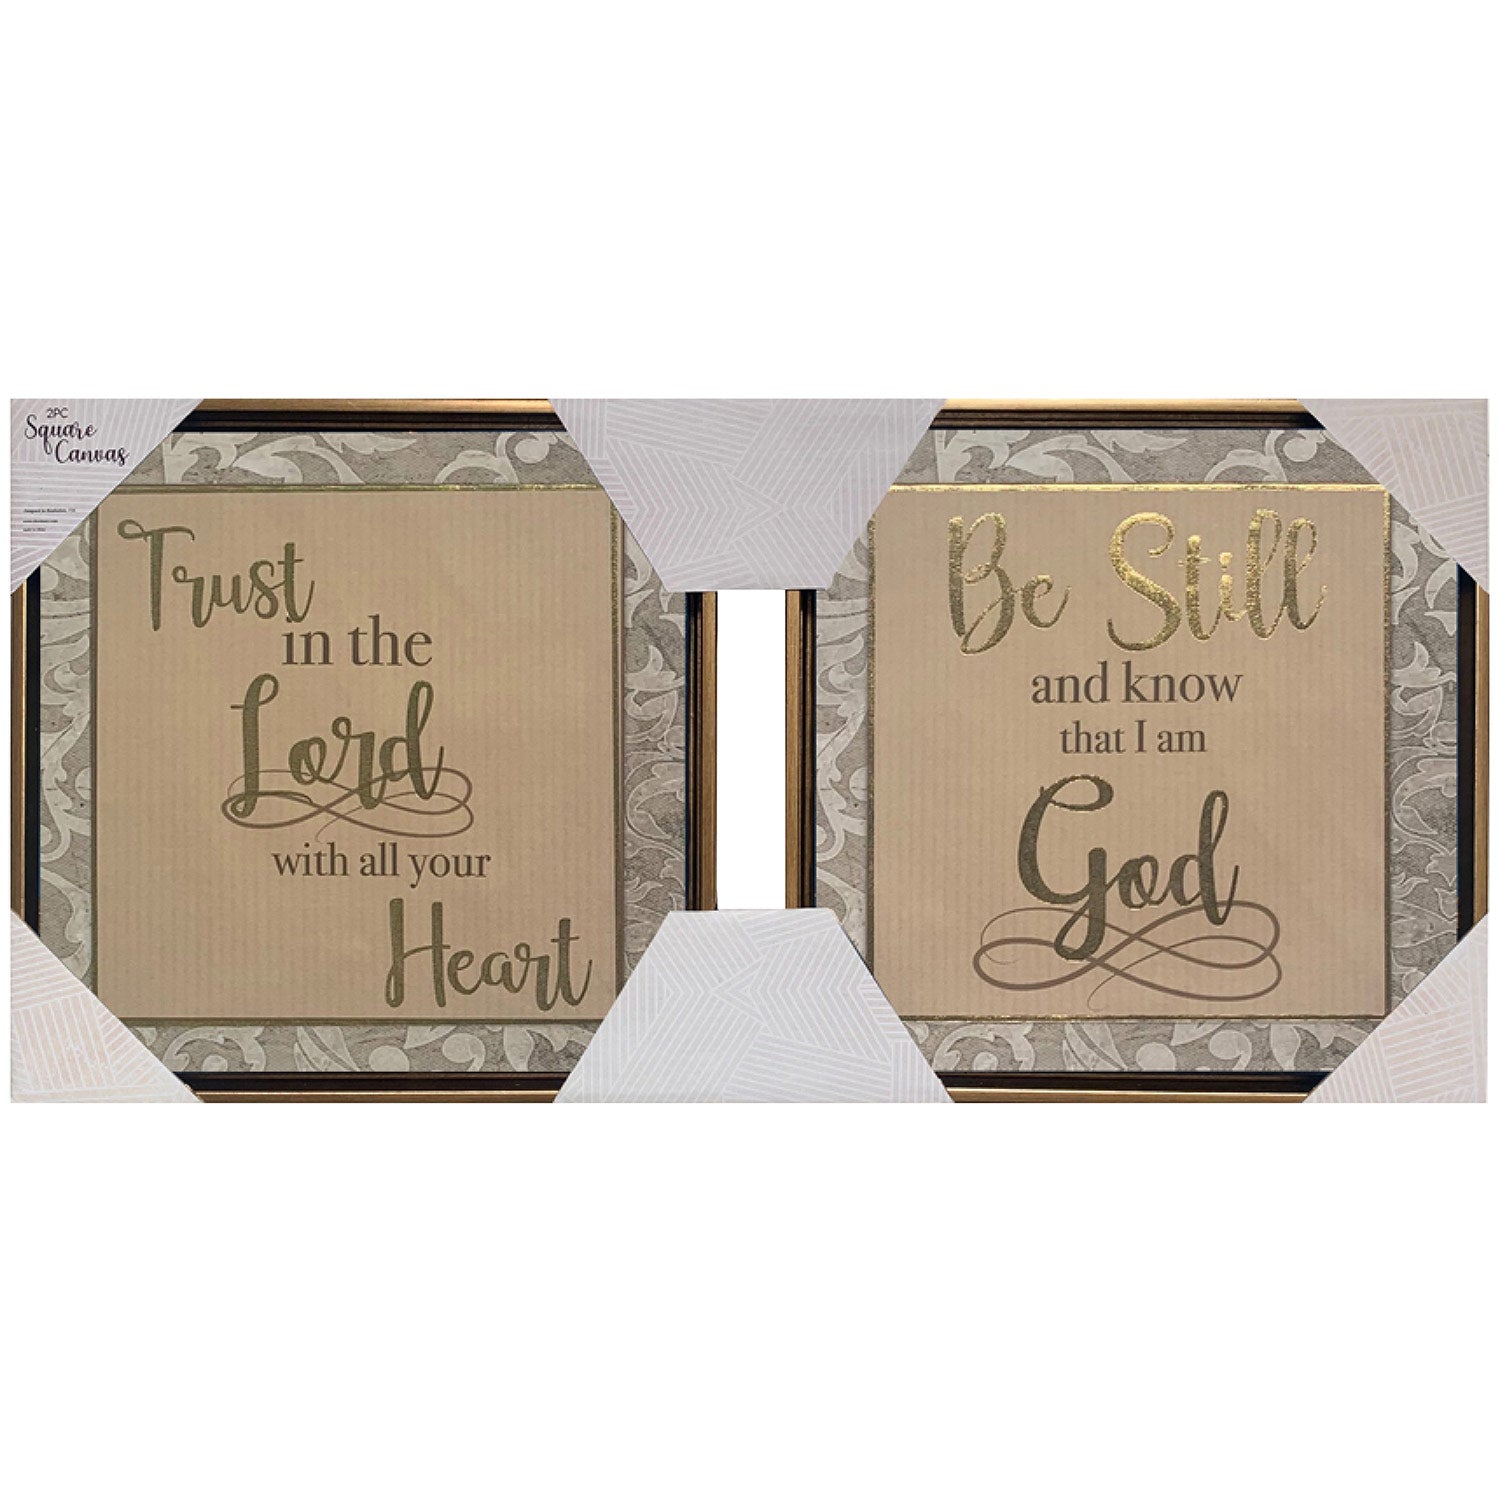 Premius 2-Piece Trust In The Lord Framed Wall Decor, 11x11 Inches Each